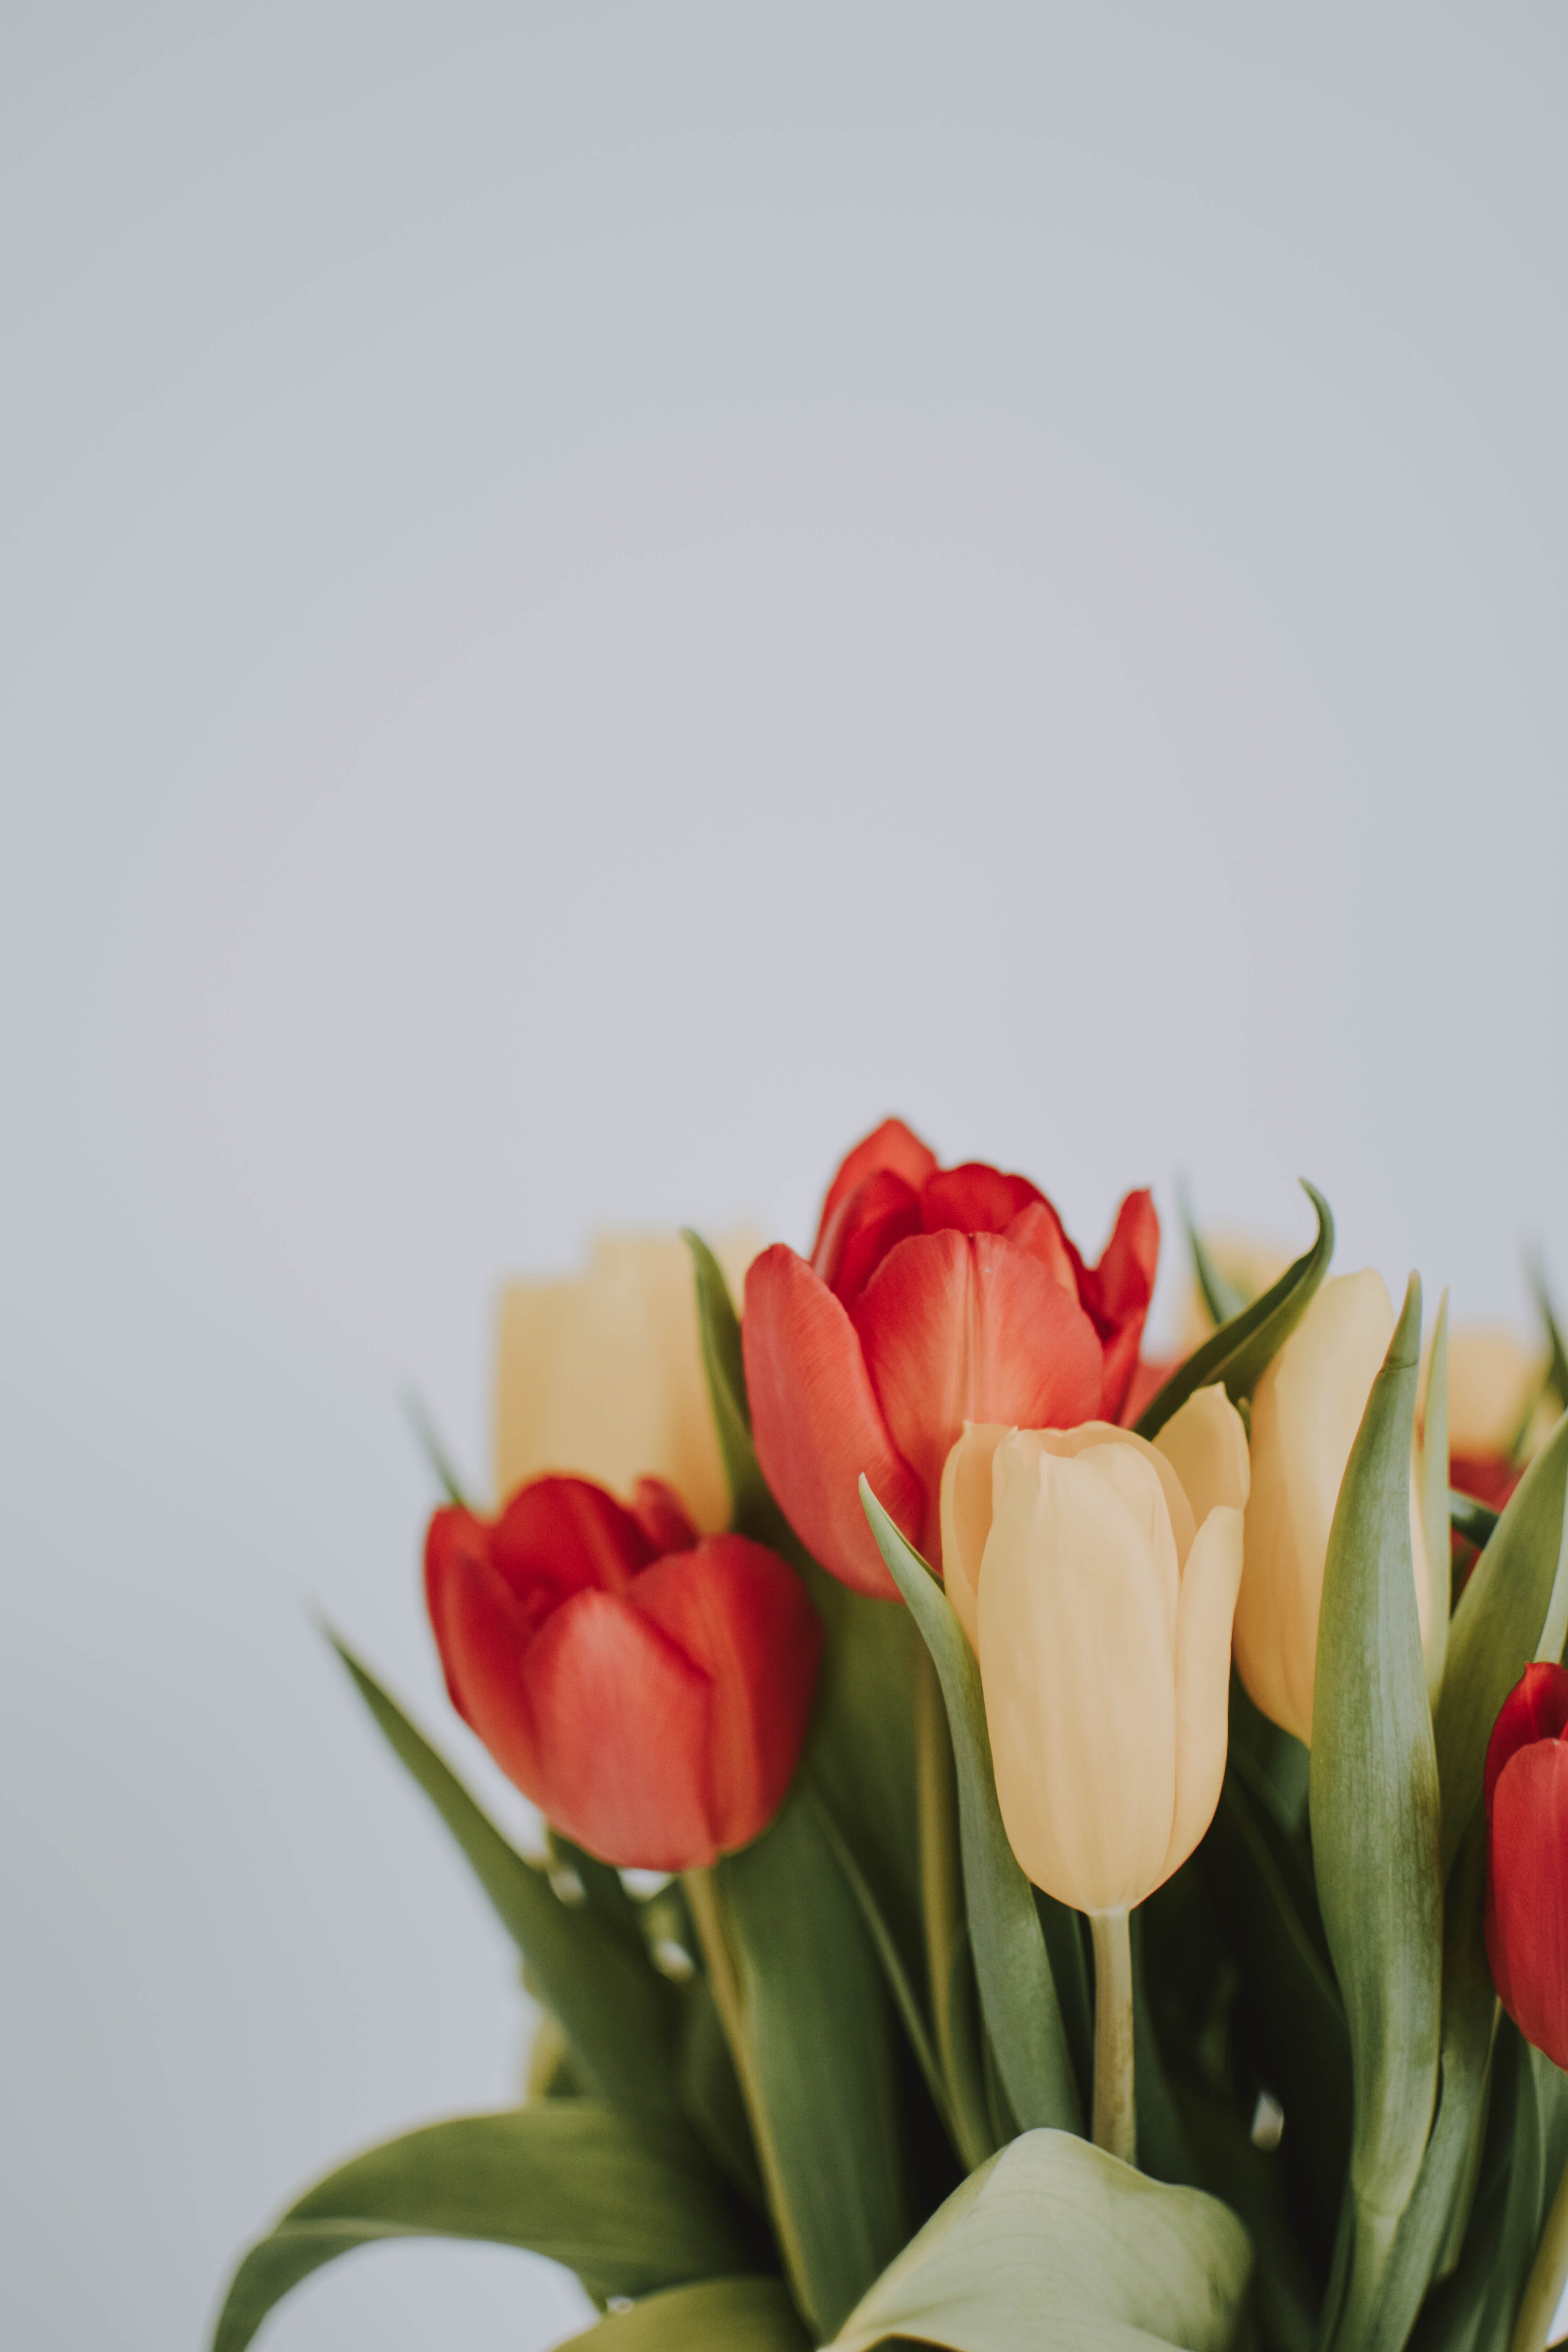 The woman returned to the grave with a bouquet of flowers, where she and Jane finally got to talk. | Source: Pexels